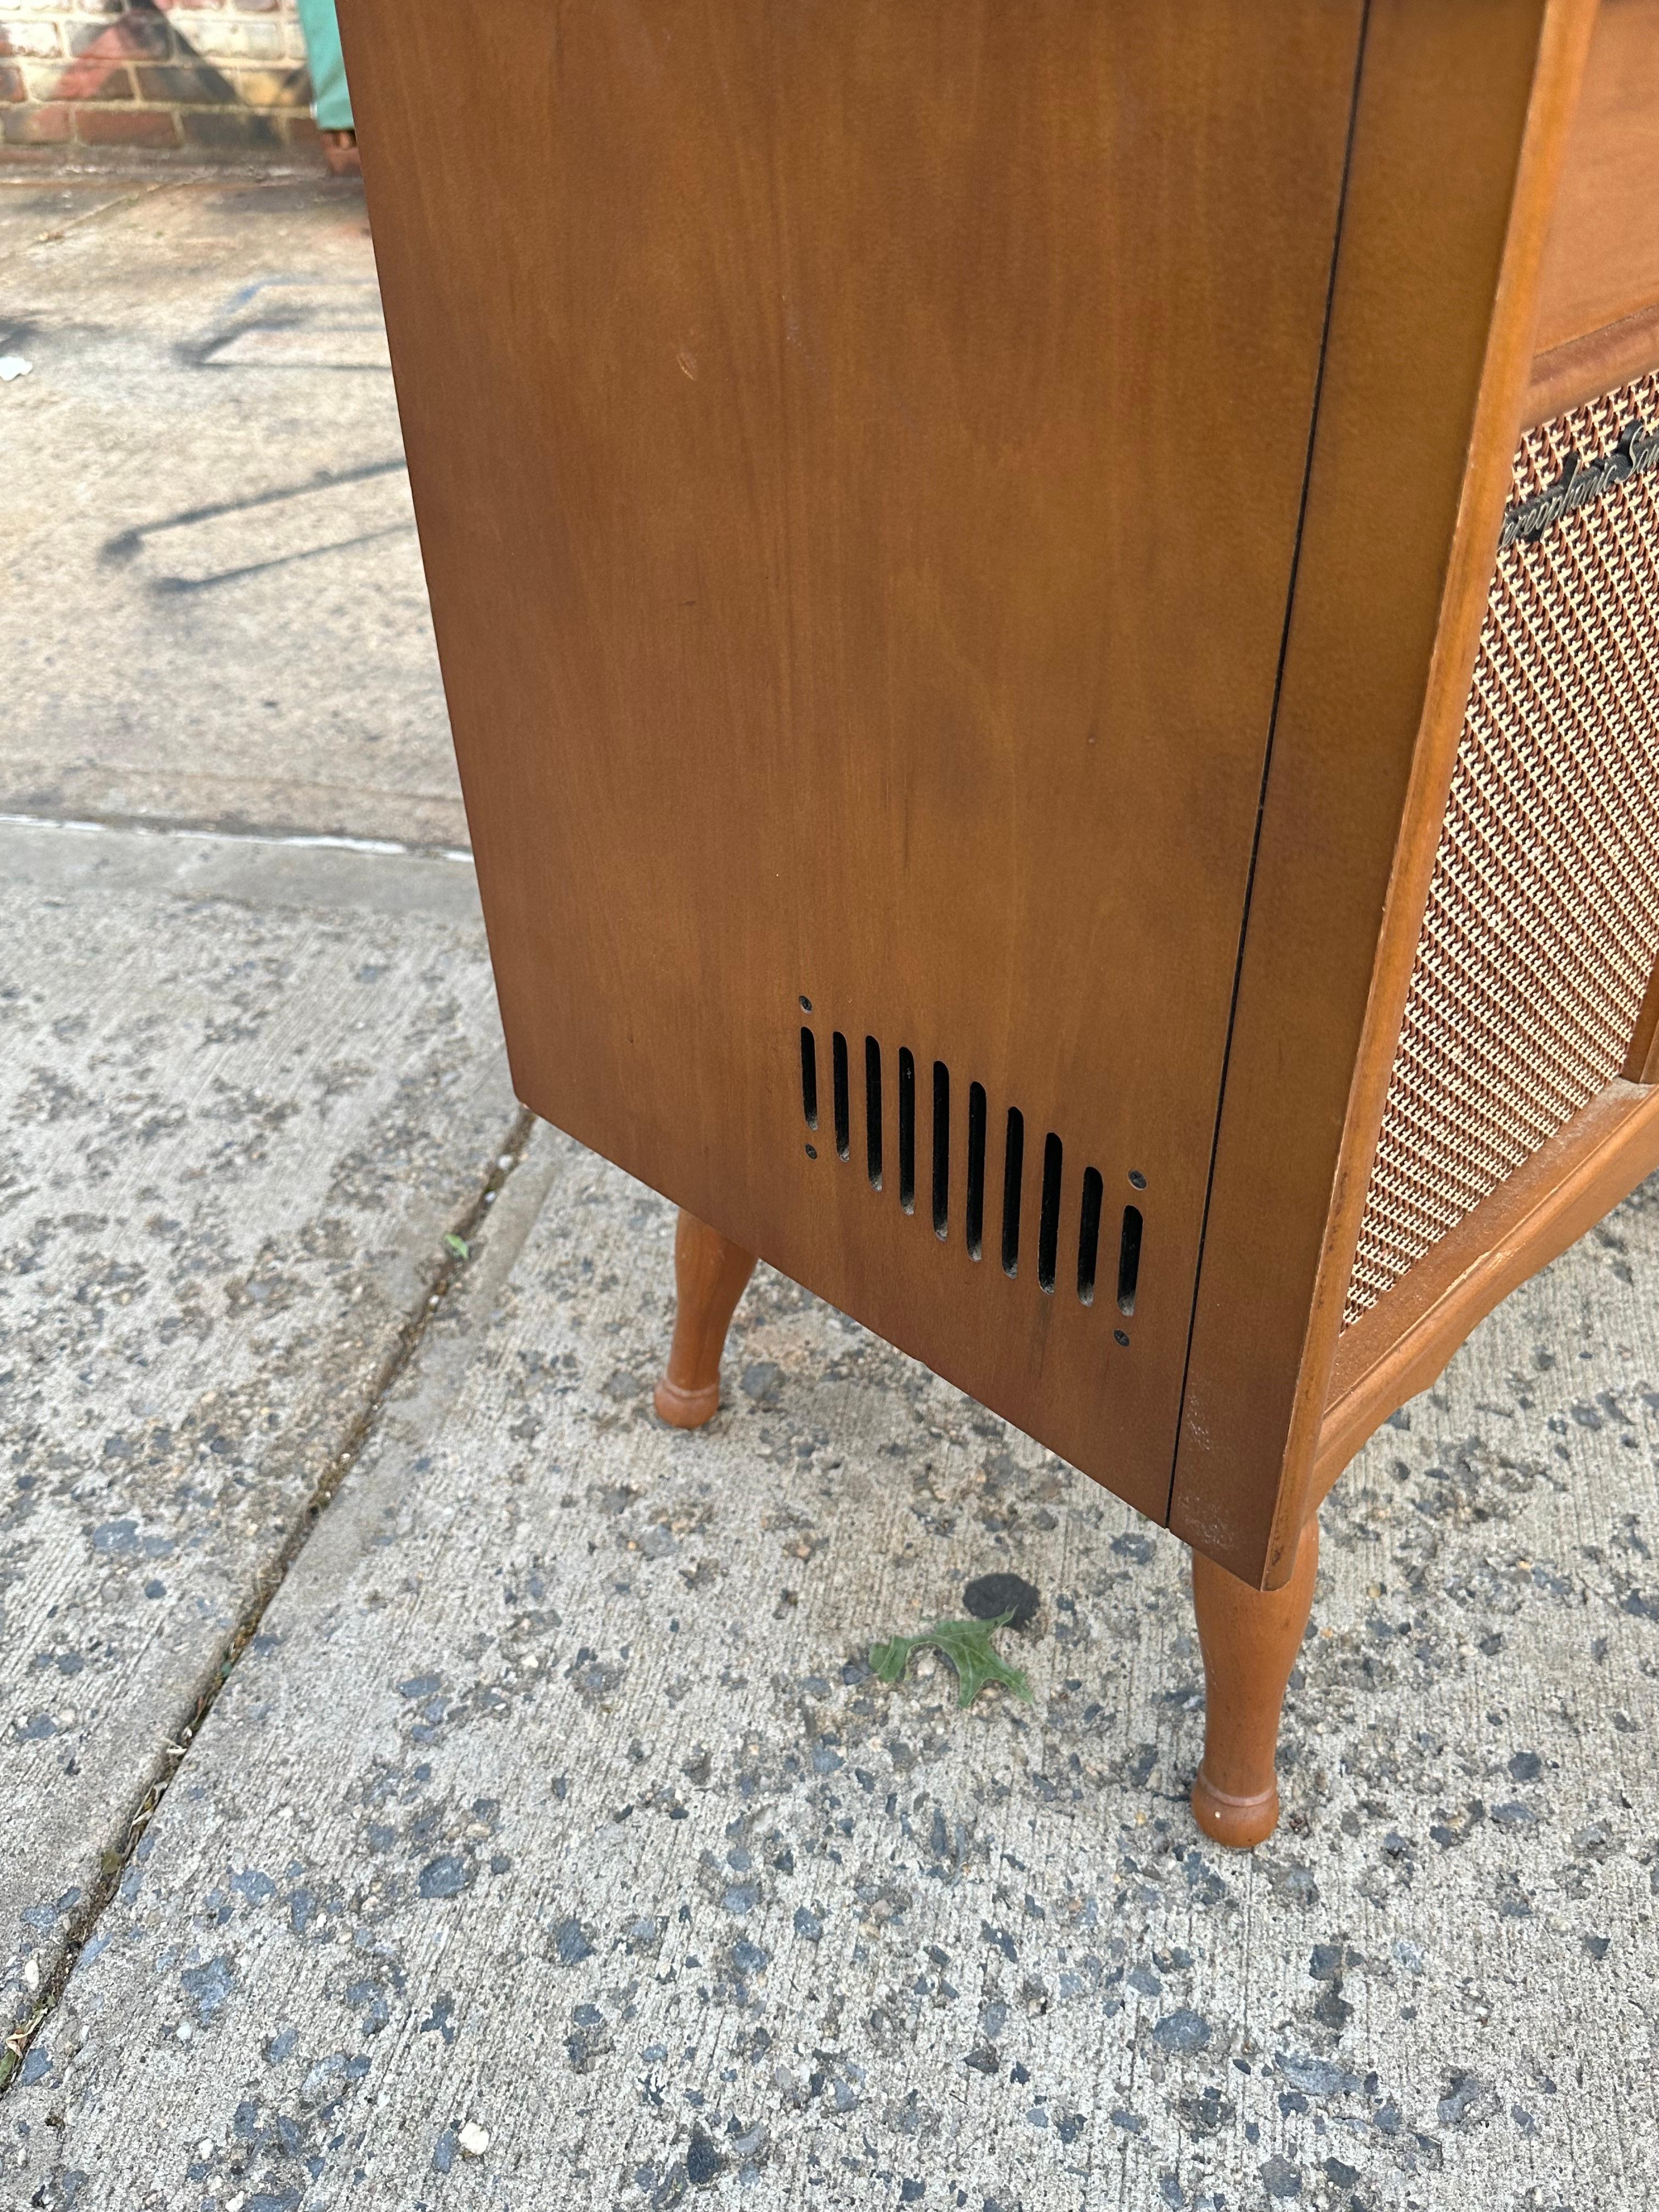 20th Century Midcentury Modern Stereo Cabinet with Turntable/Radio by Delmonico/Nivico (JVC)